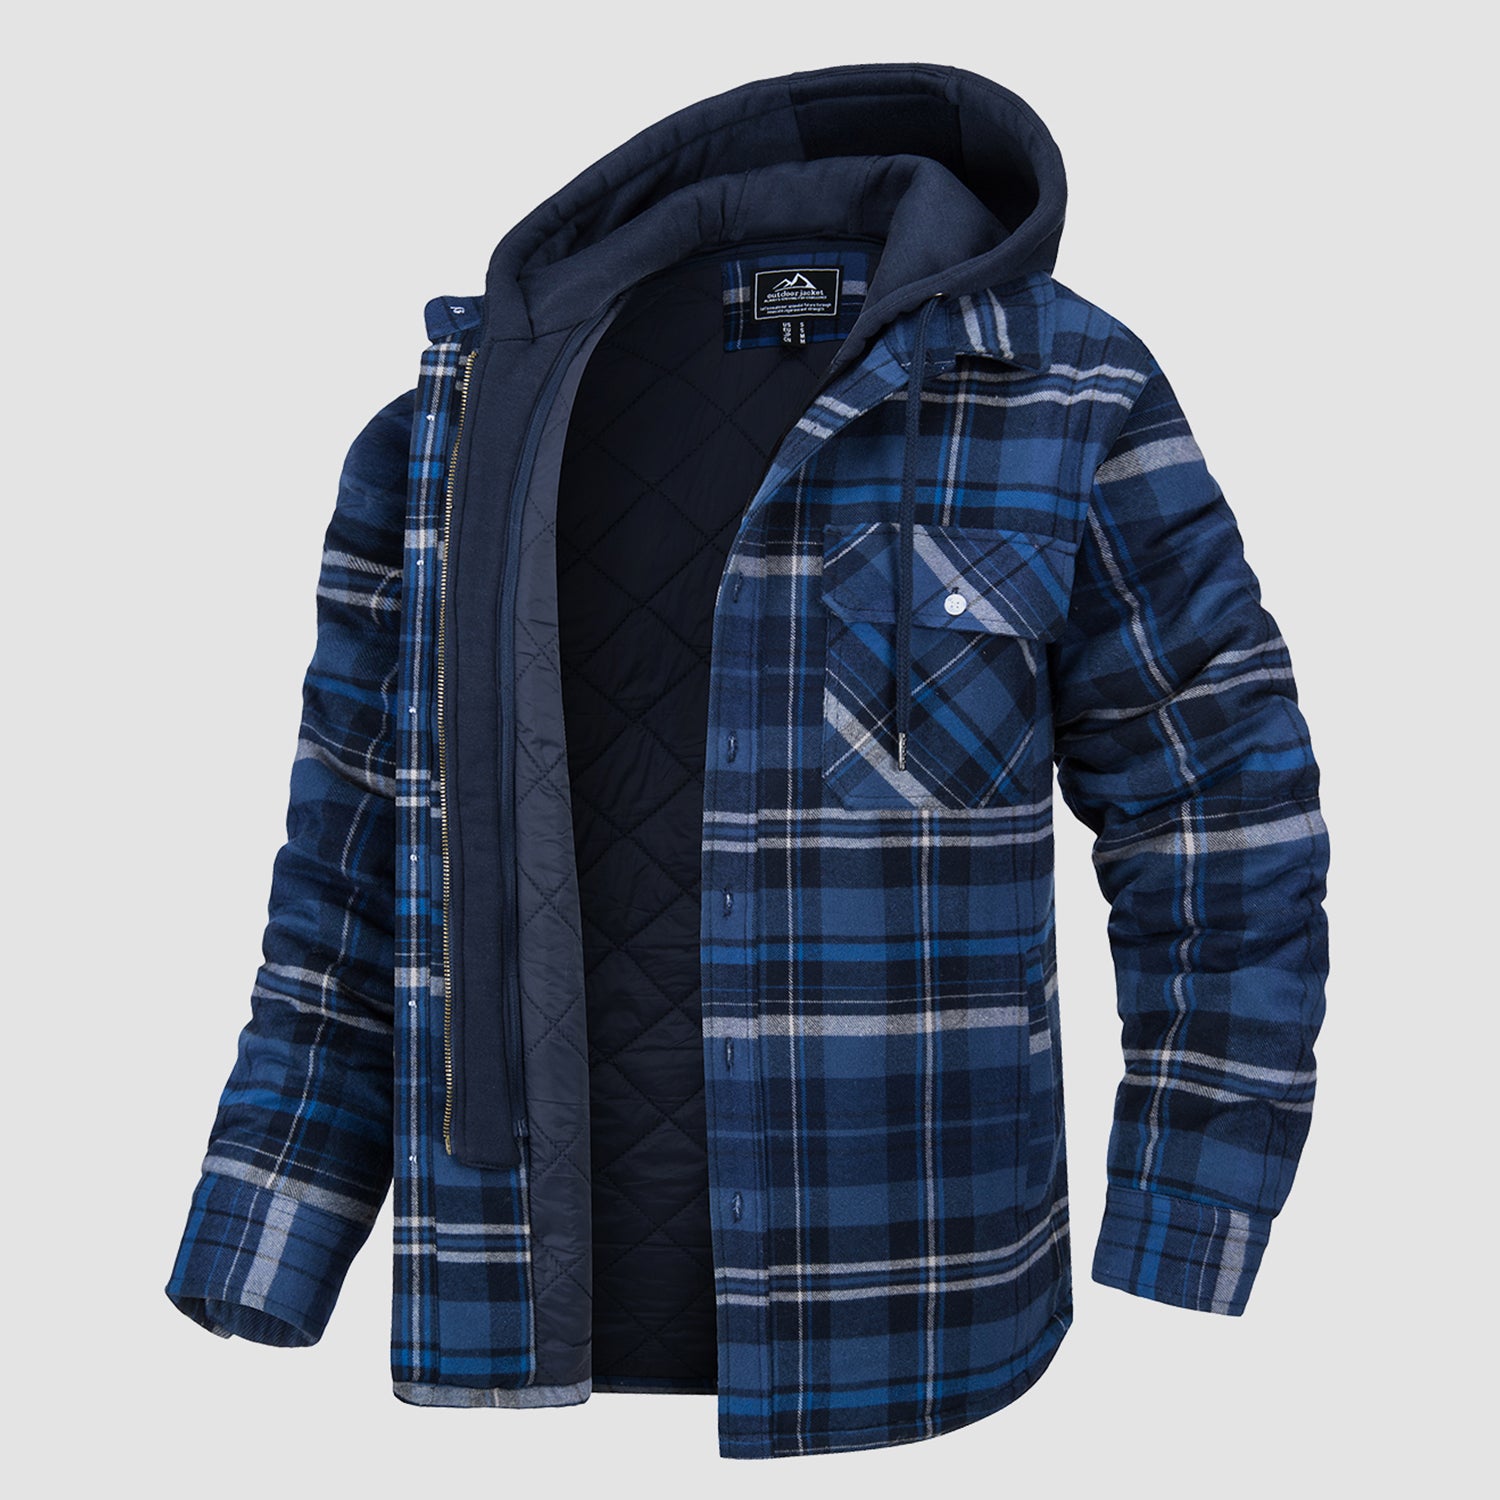 Men's Flannel Shirt Jacket, Thick Hoodie Outwear